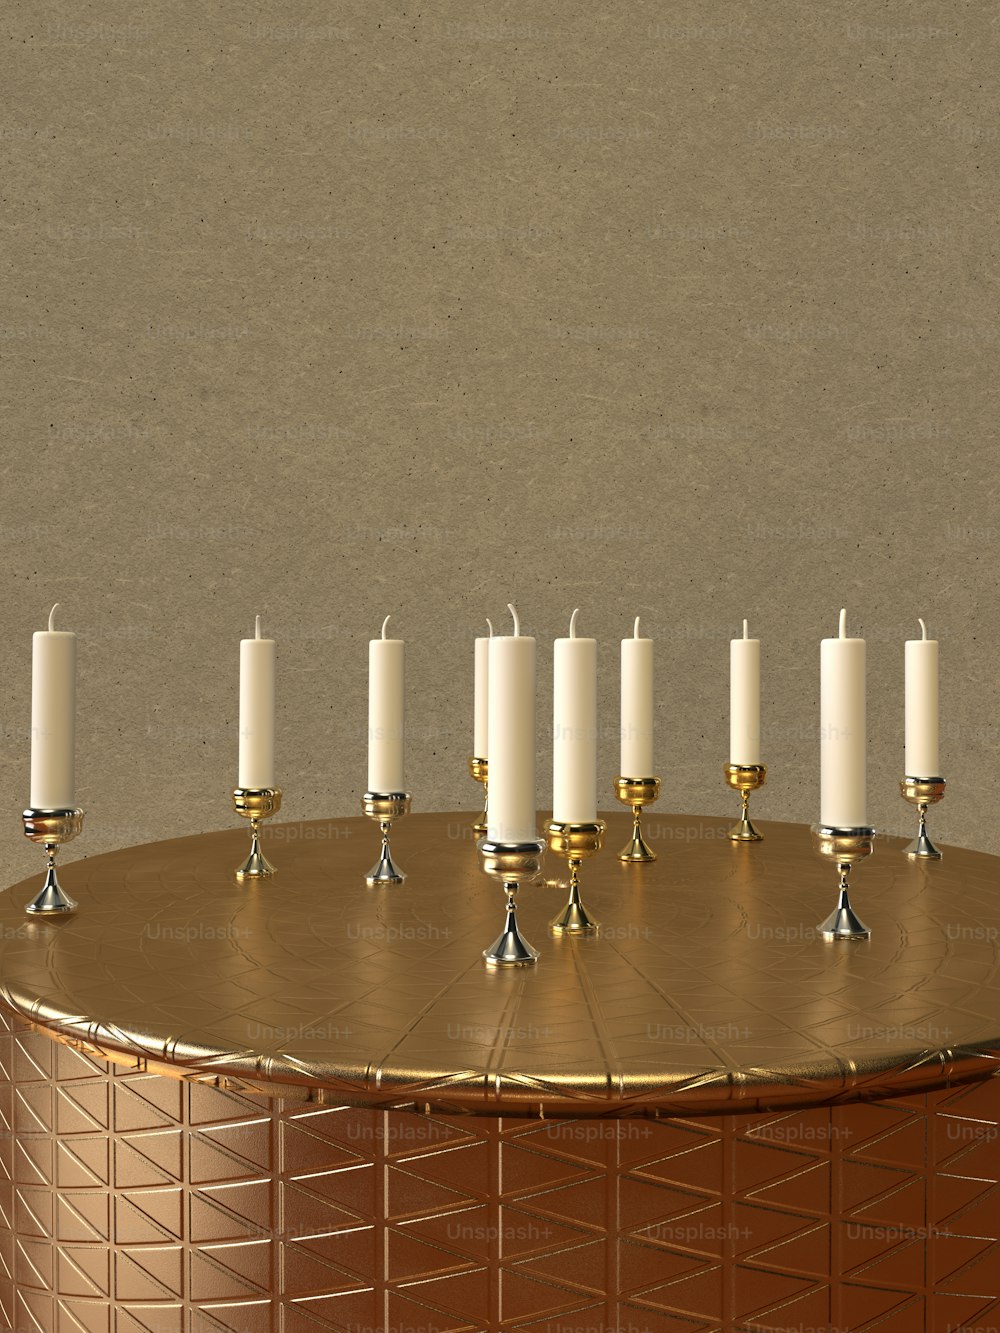 a group of white candles sitting on top of a table